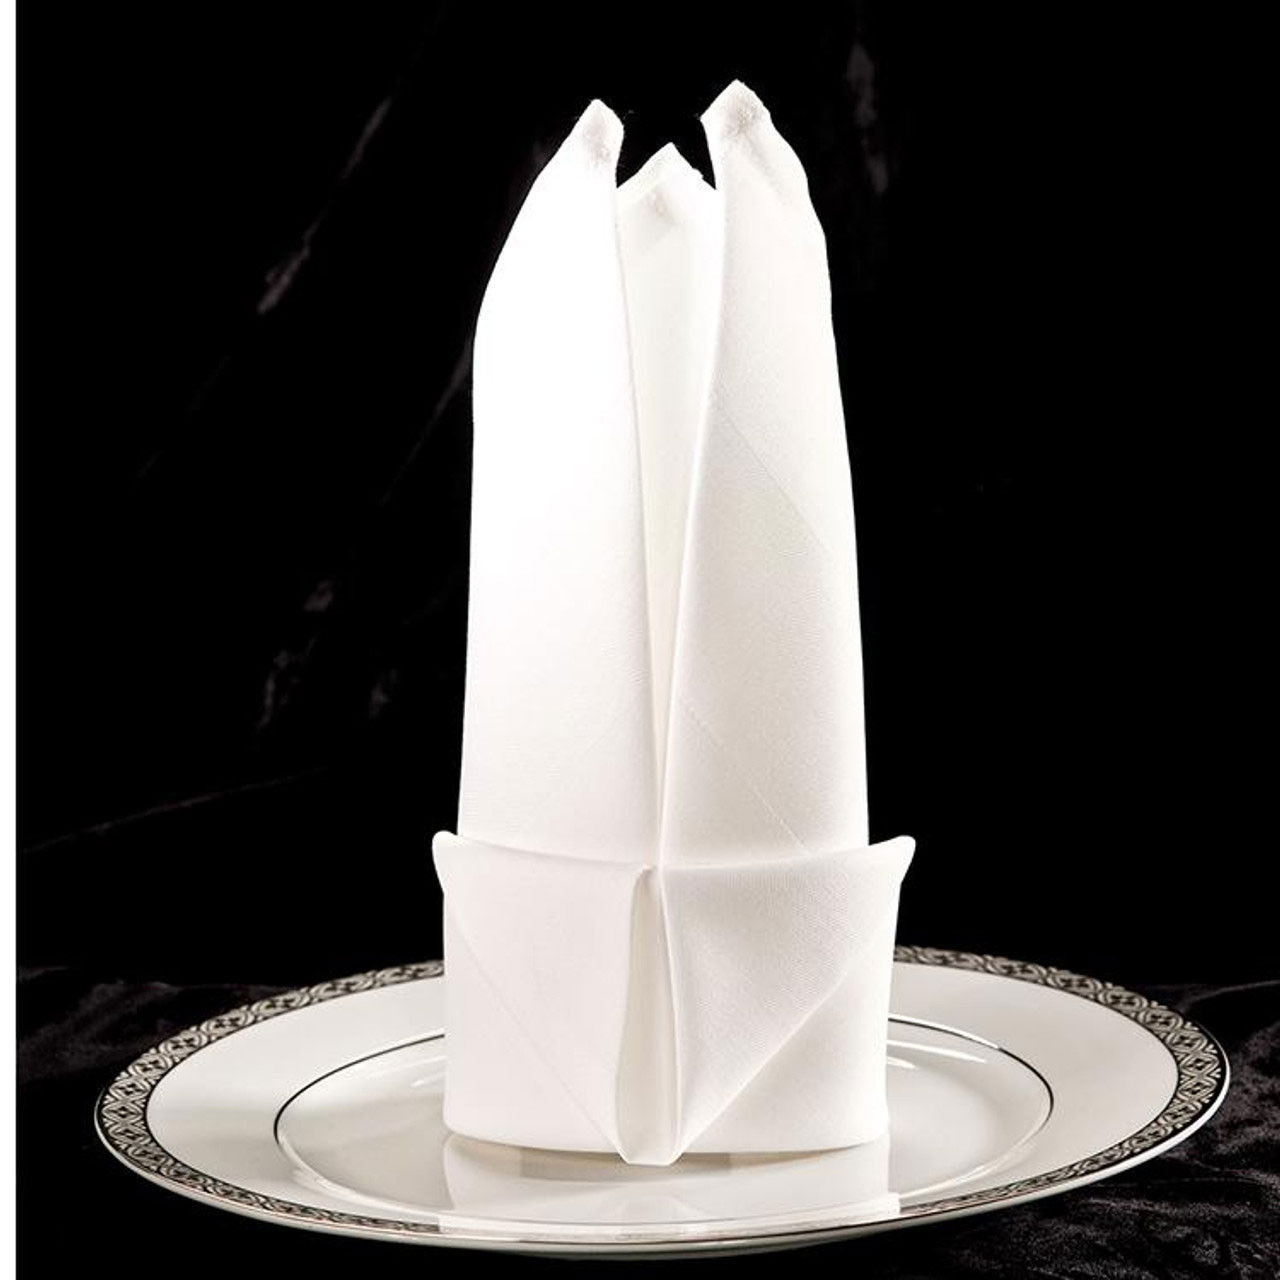 What materials make up the luxury round tablecloths by PARNELL® Satin Band?